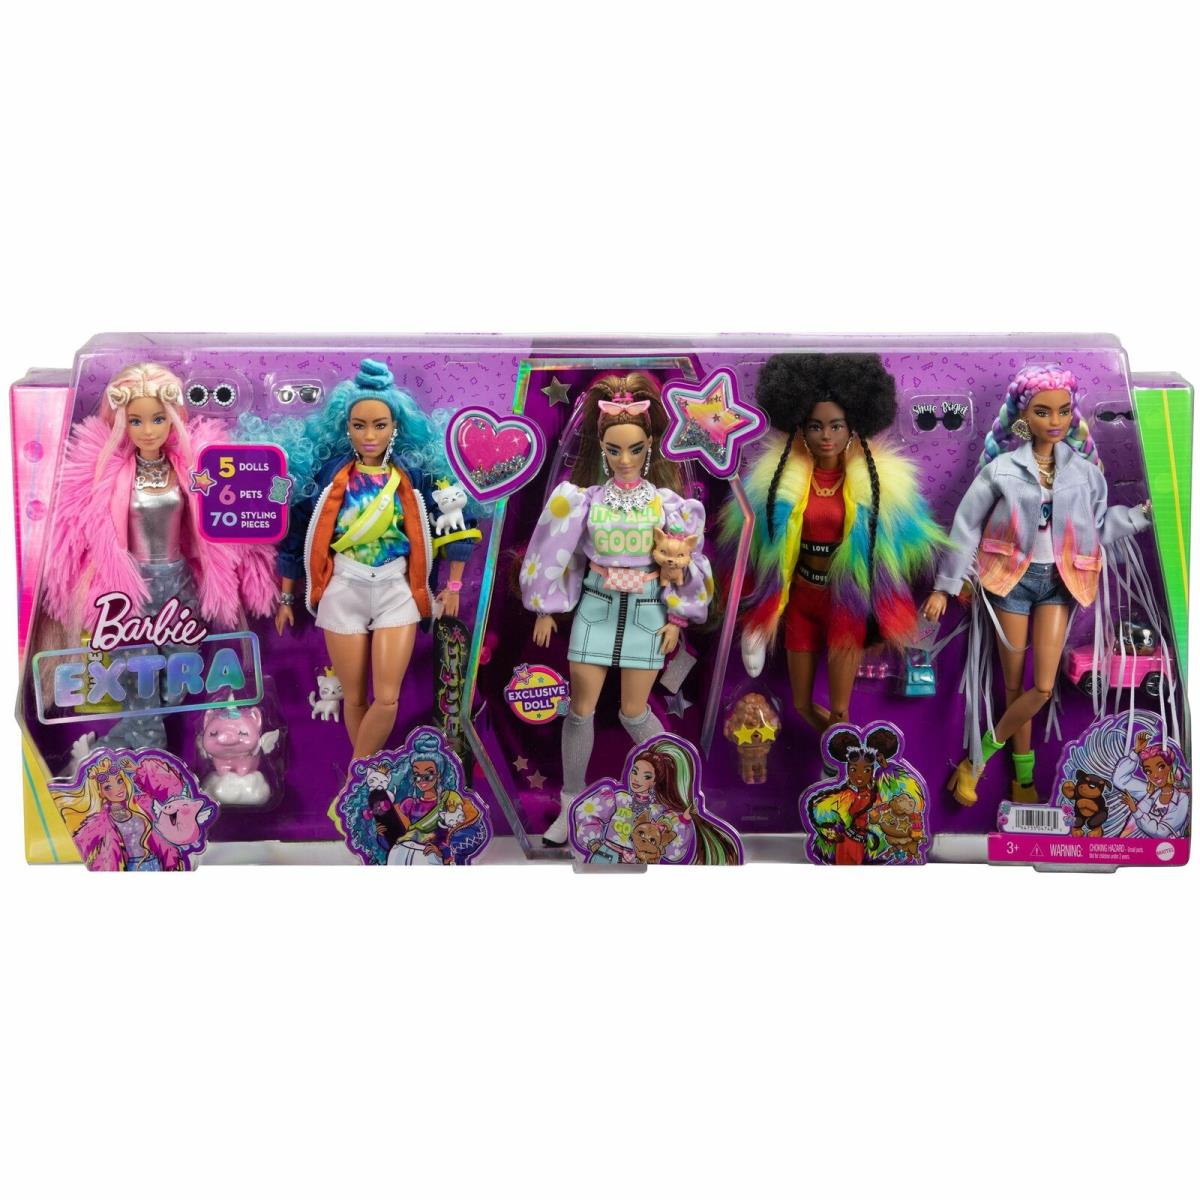 Barbie Extra 5-Doll Set with 6 Pets 70 Styling Pieces For Kids 3 Years Up